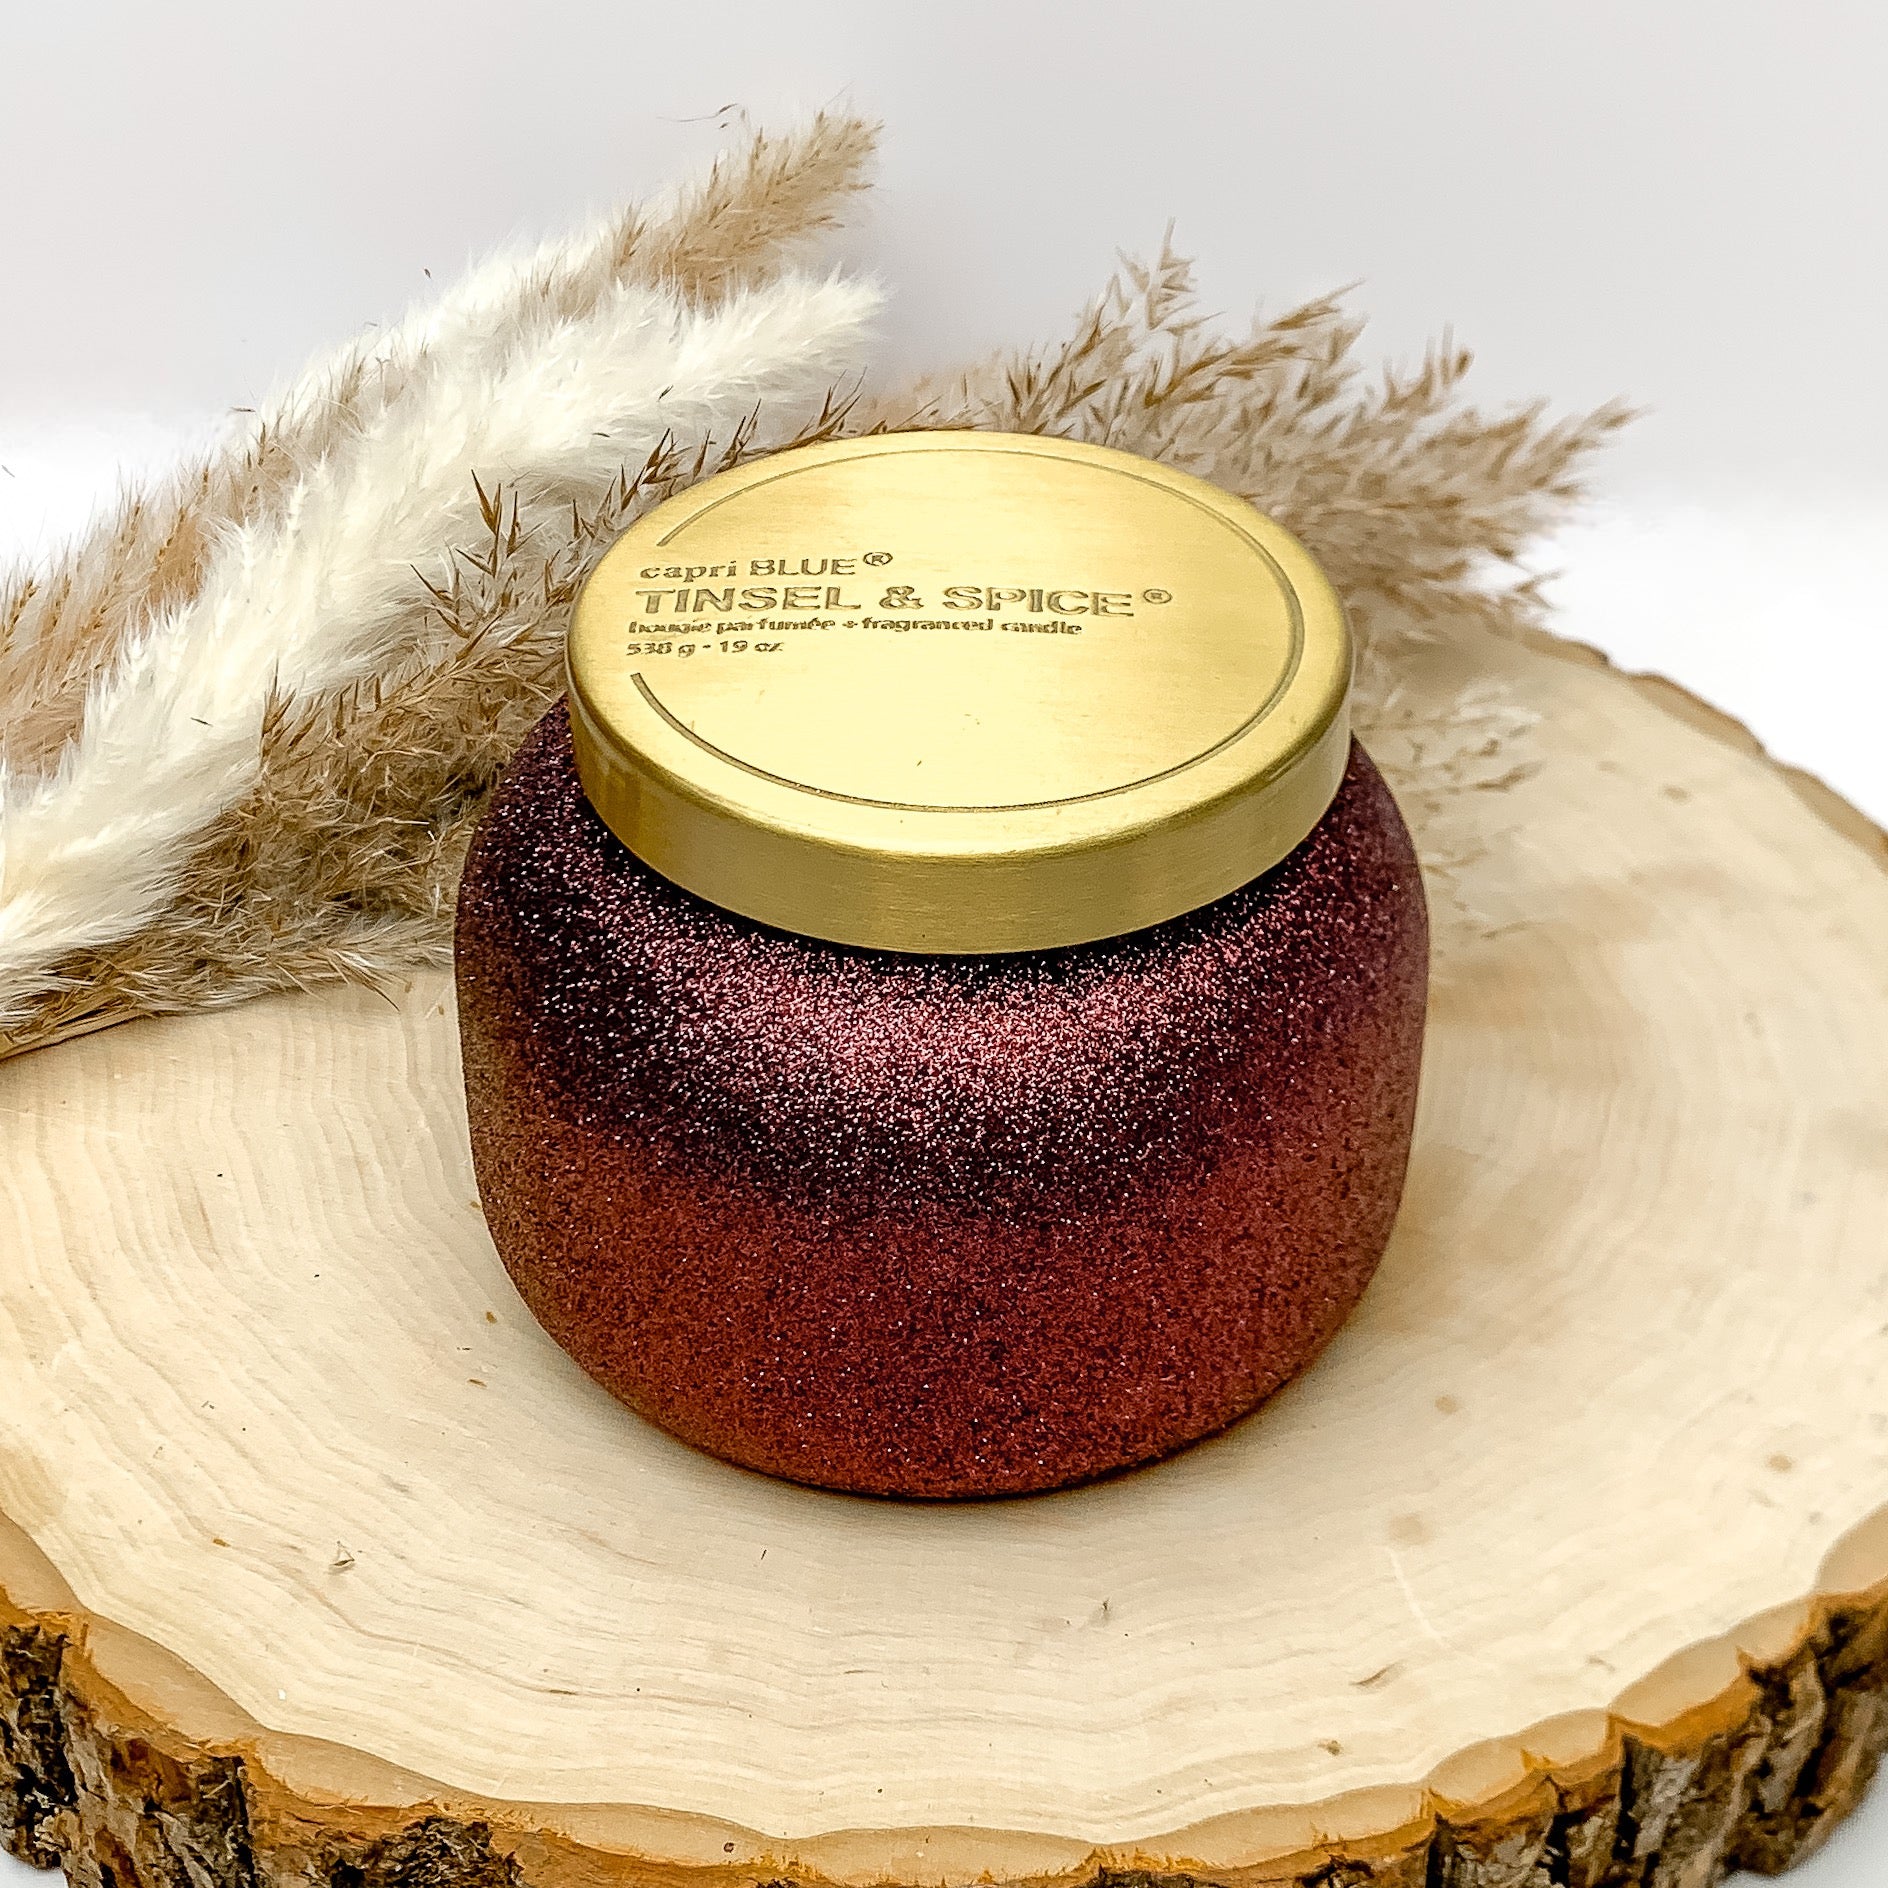 Capri blue 19 oz. jar candle in maroon glitter. The scent of this canfdle is tinsel and spice. The candle is sitting on a wood piece with feathers behind it. The background of the picture is white.